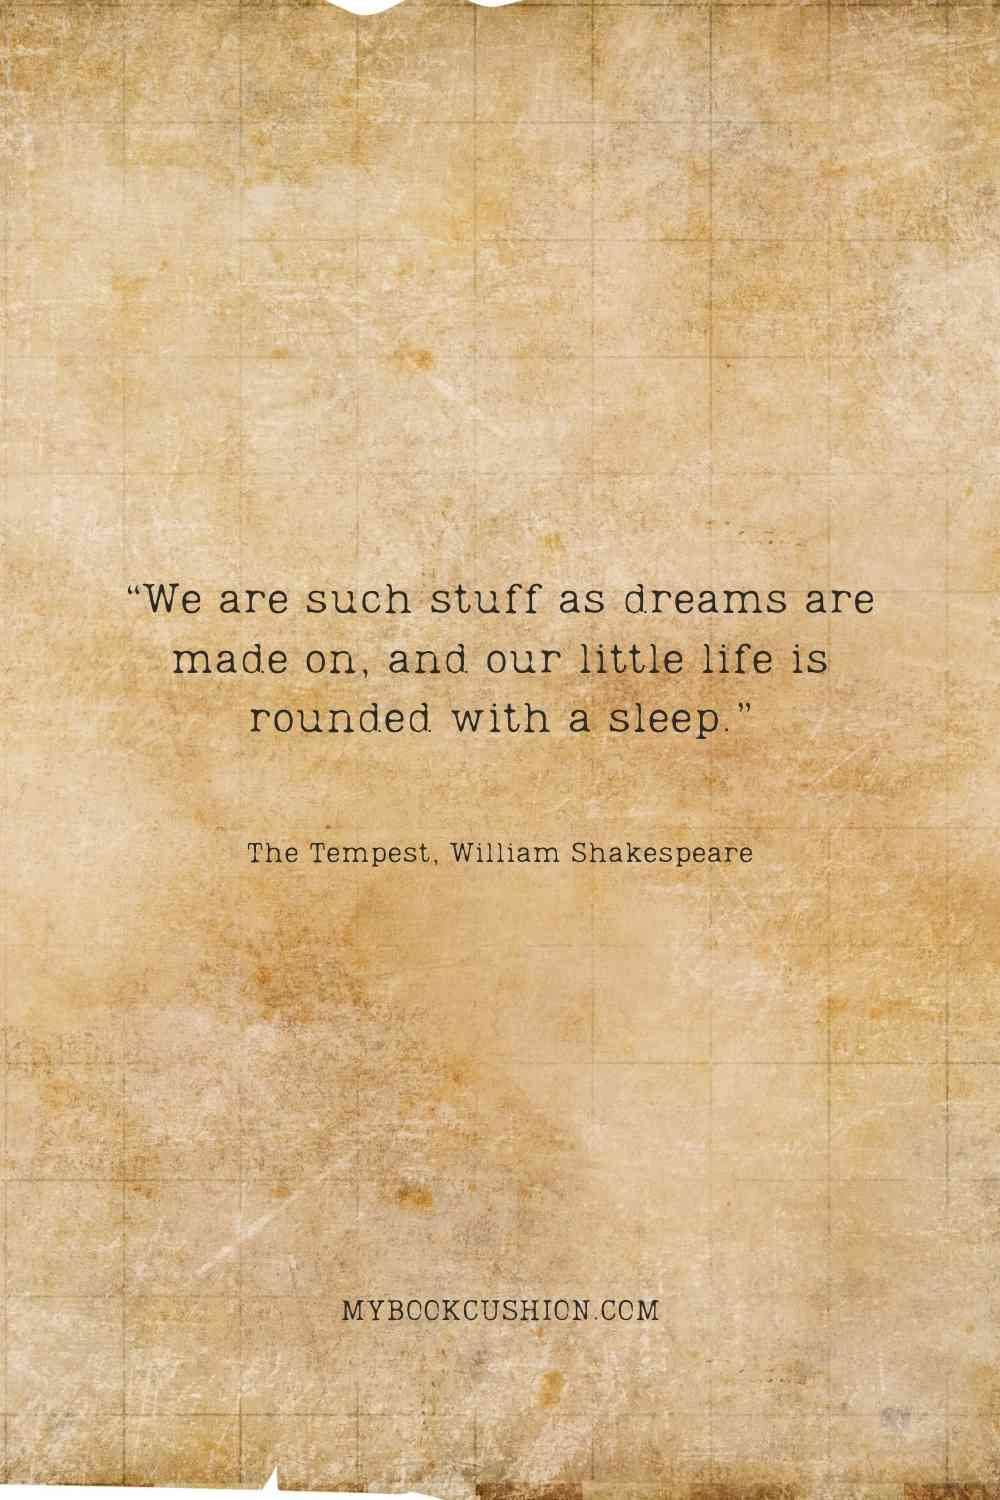 “We are such stuff as dreams are made on, and our little life is rounded with a sleep.” -“We are such stuff as dreams are made on, and our little life is rounded with a sleep.” - The Tempest, William Shakespeare